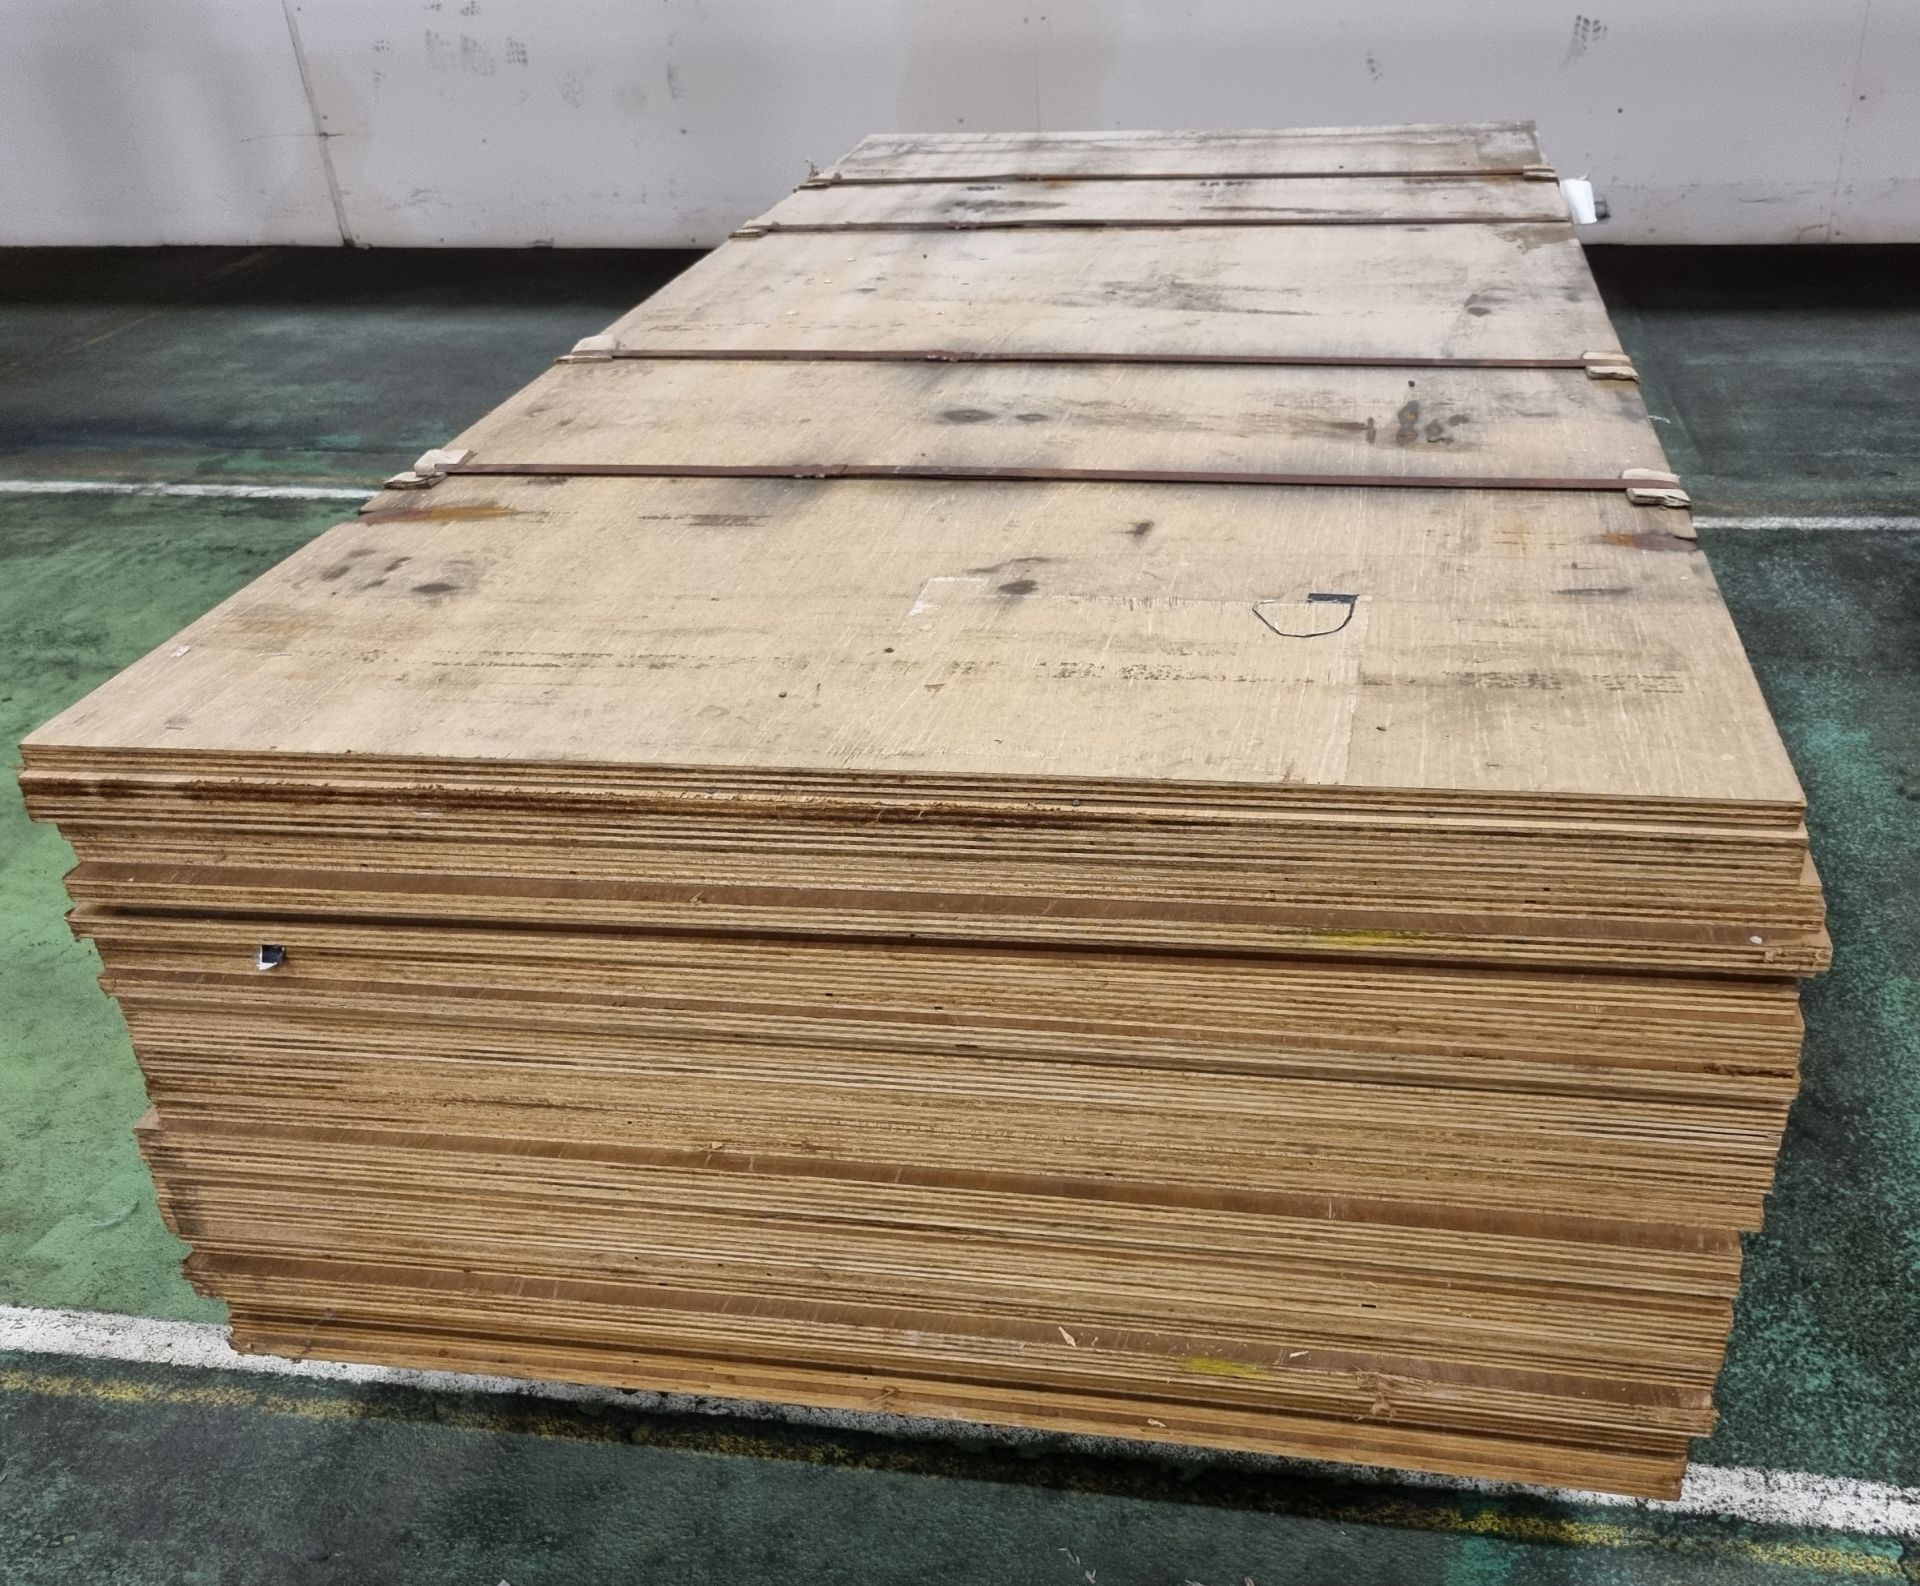 Pallet of 18mm Class 2 plywood - 8x4ft (244x122cm) - 33 sheets - Image 2 of 3